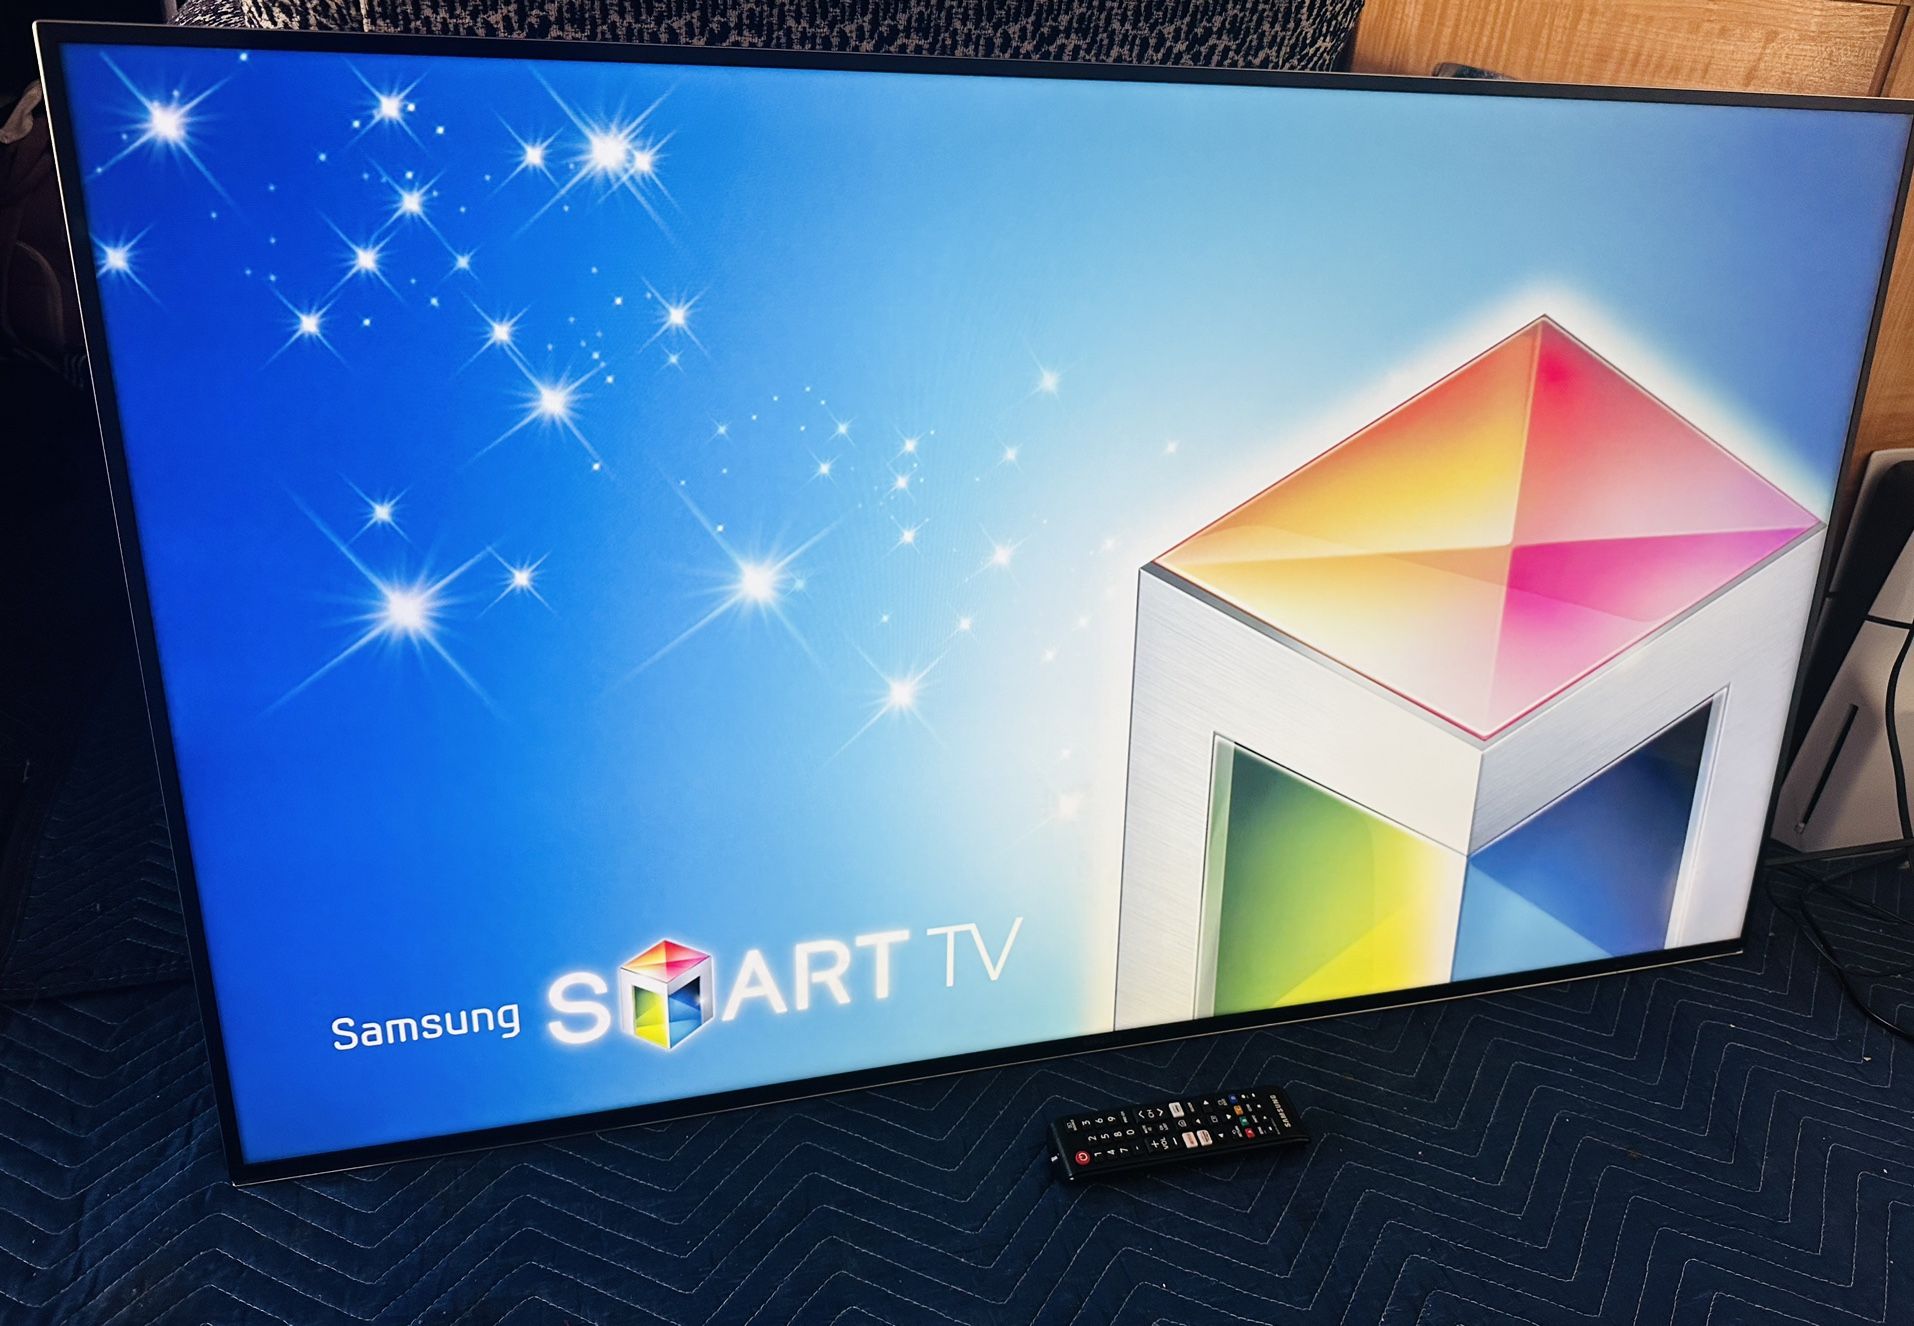 50 Inch Samusng Smart Flat Screen TV with Original Remote! (Also have more TVs Available!)